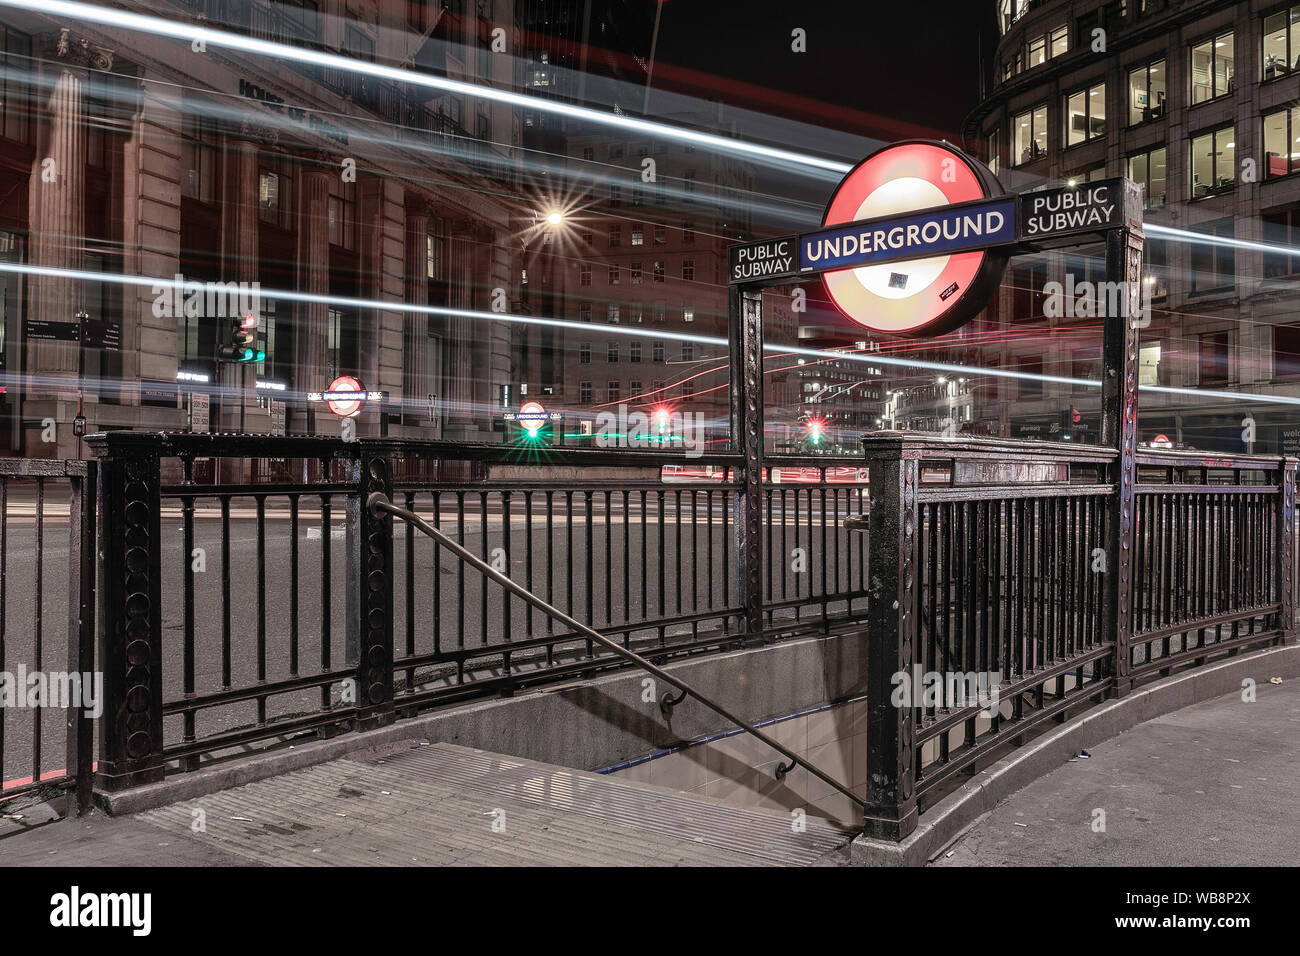 Underground signs in London streets at night Stock Photo